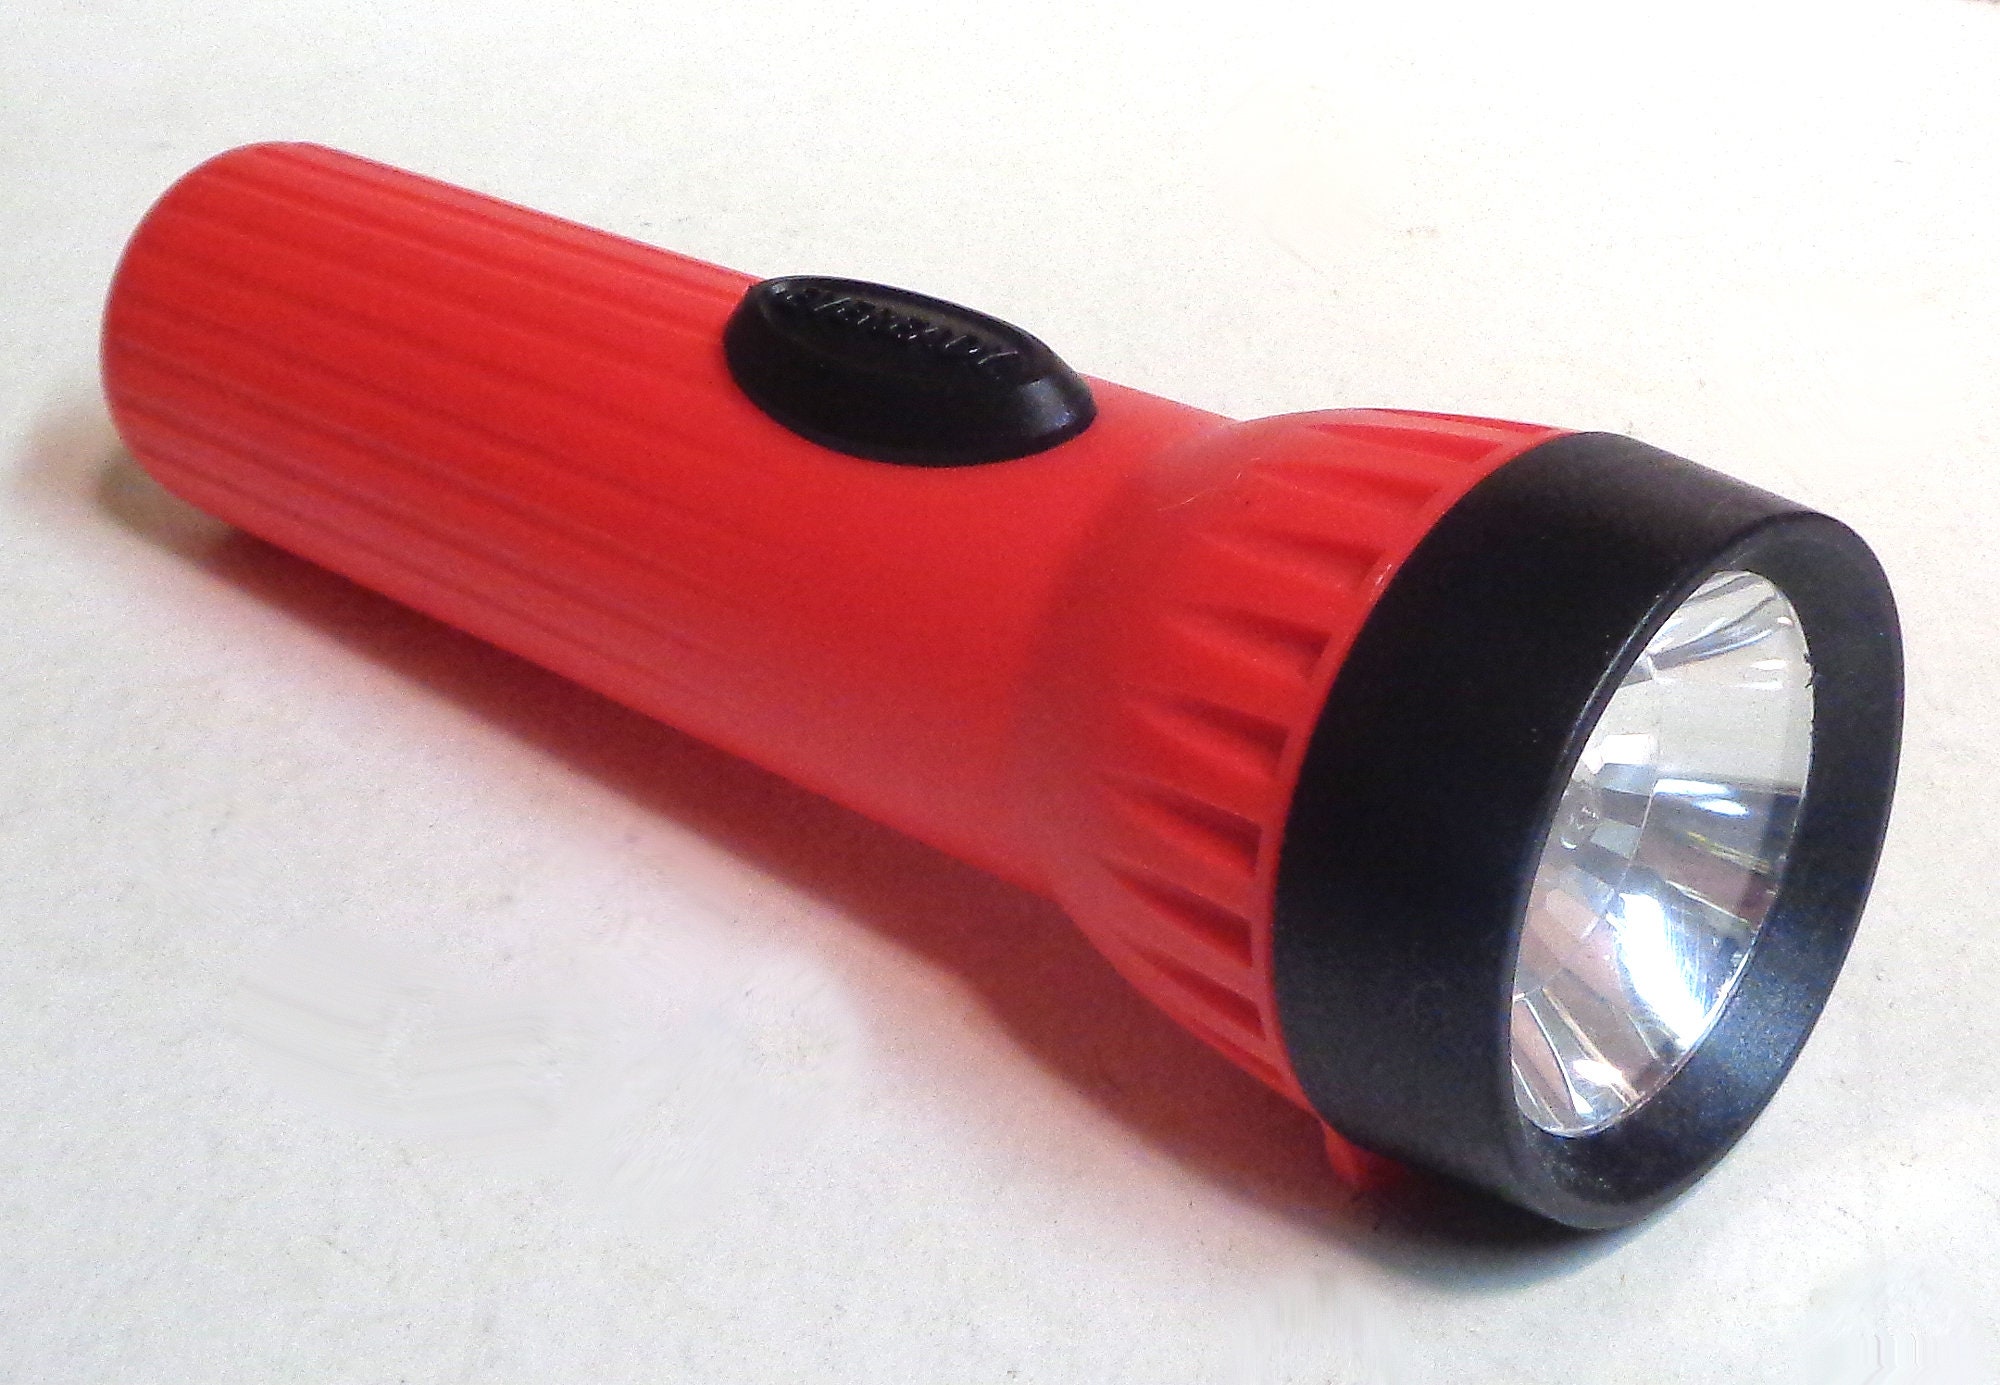 Add four Eveready LED flashlights with batteries to your emergency kit at  just $7